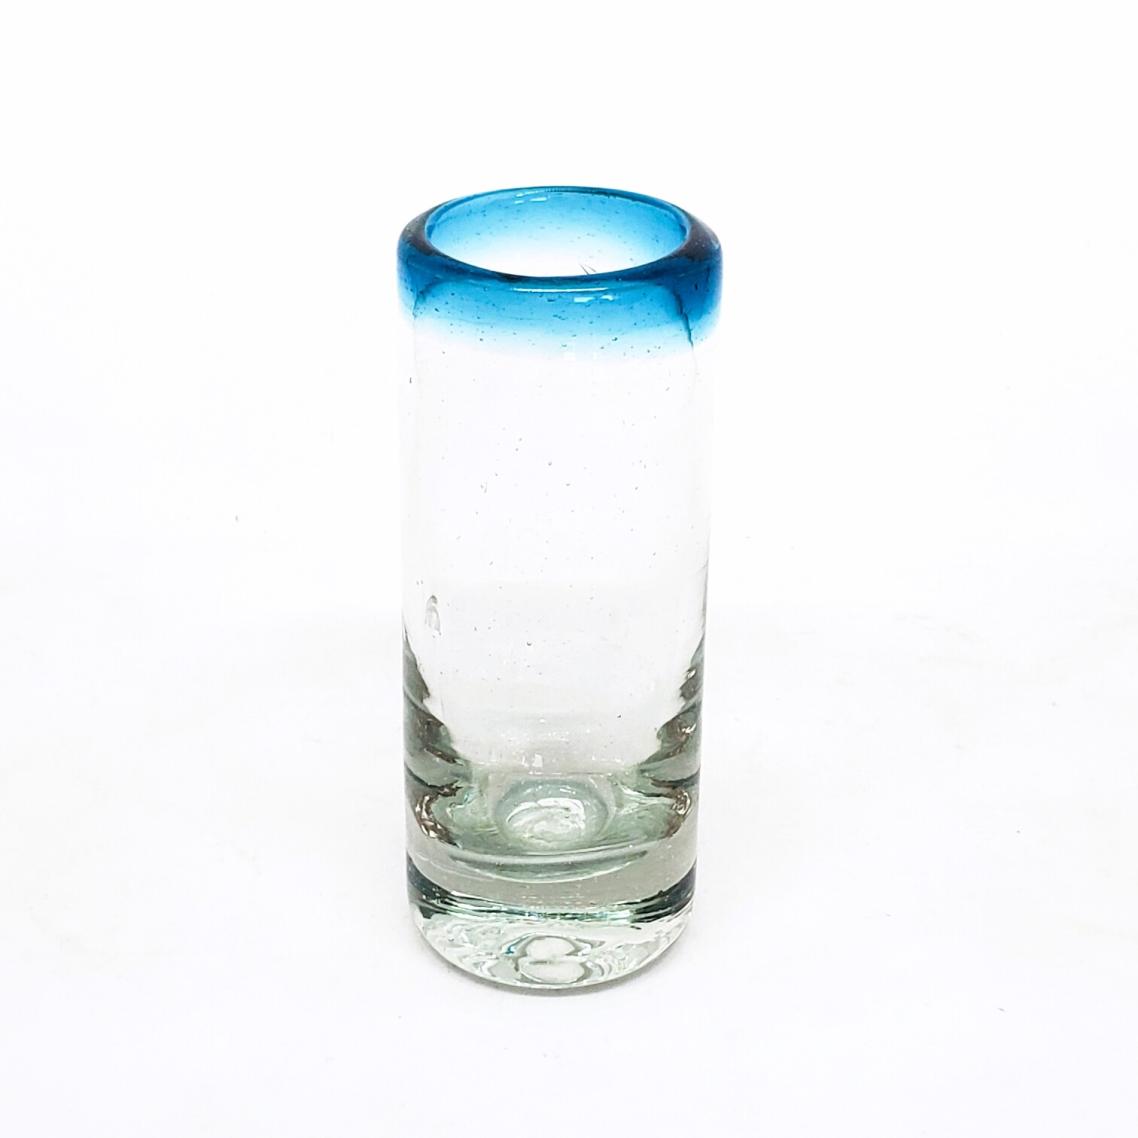 New Items / Aqua Blue Rim 2 oz Tequila Shot Glasses  / Reminiscent of the turquoise Caribbean waters of Tulum, our Aqua Blue Rim shot glasses are perfect for enjoying mezcal or any other liquor.